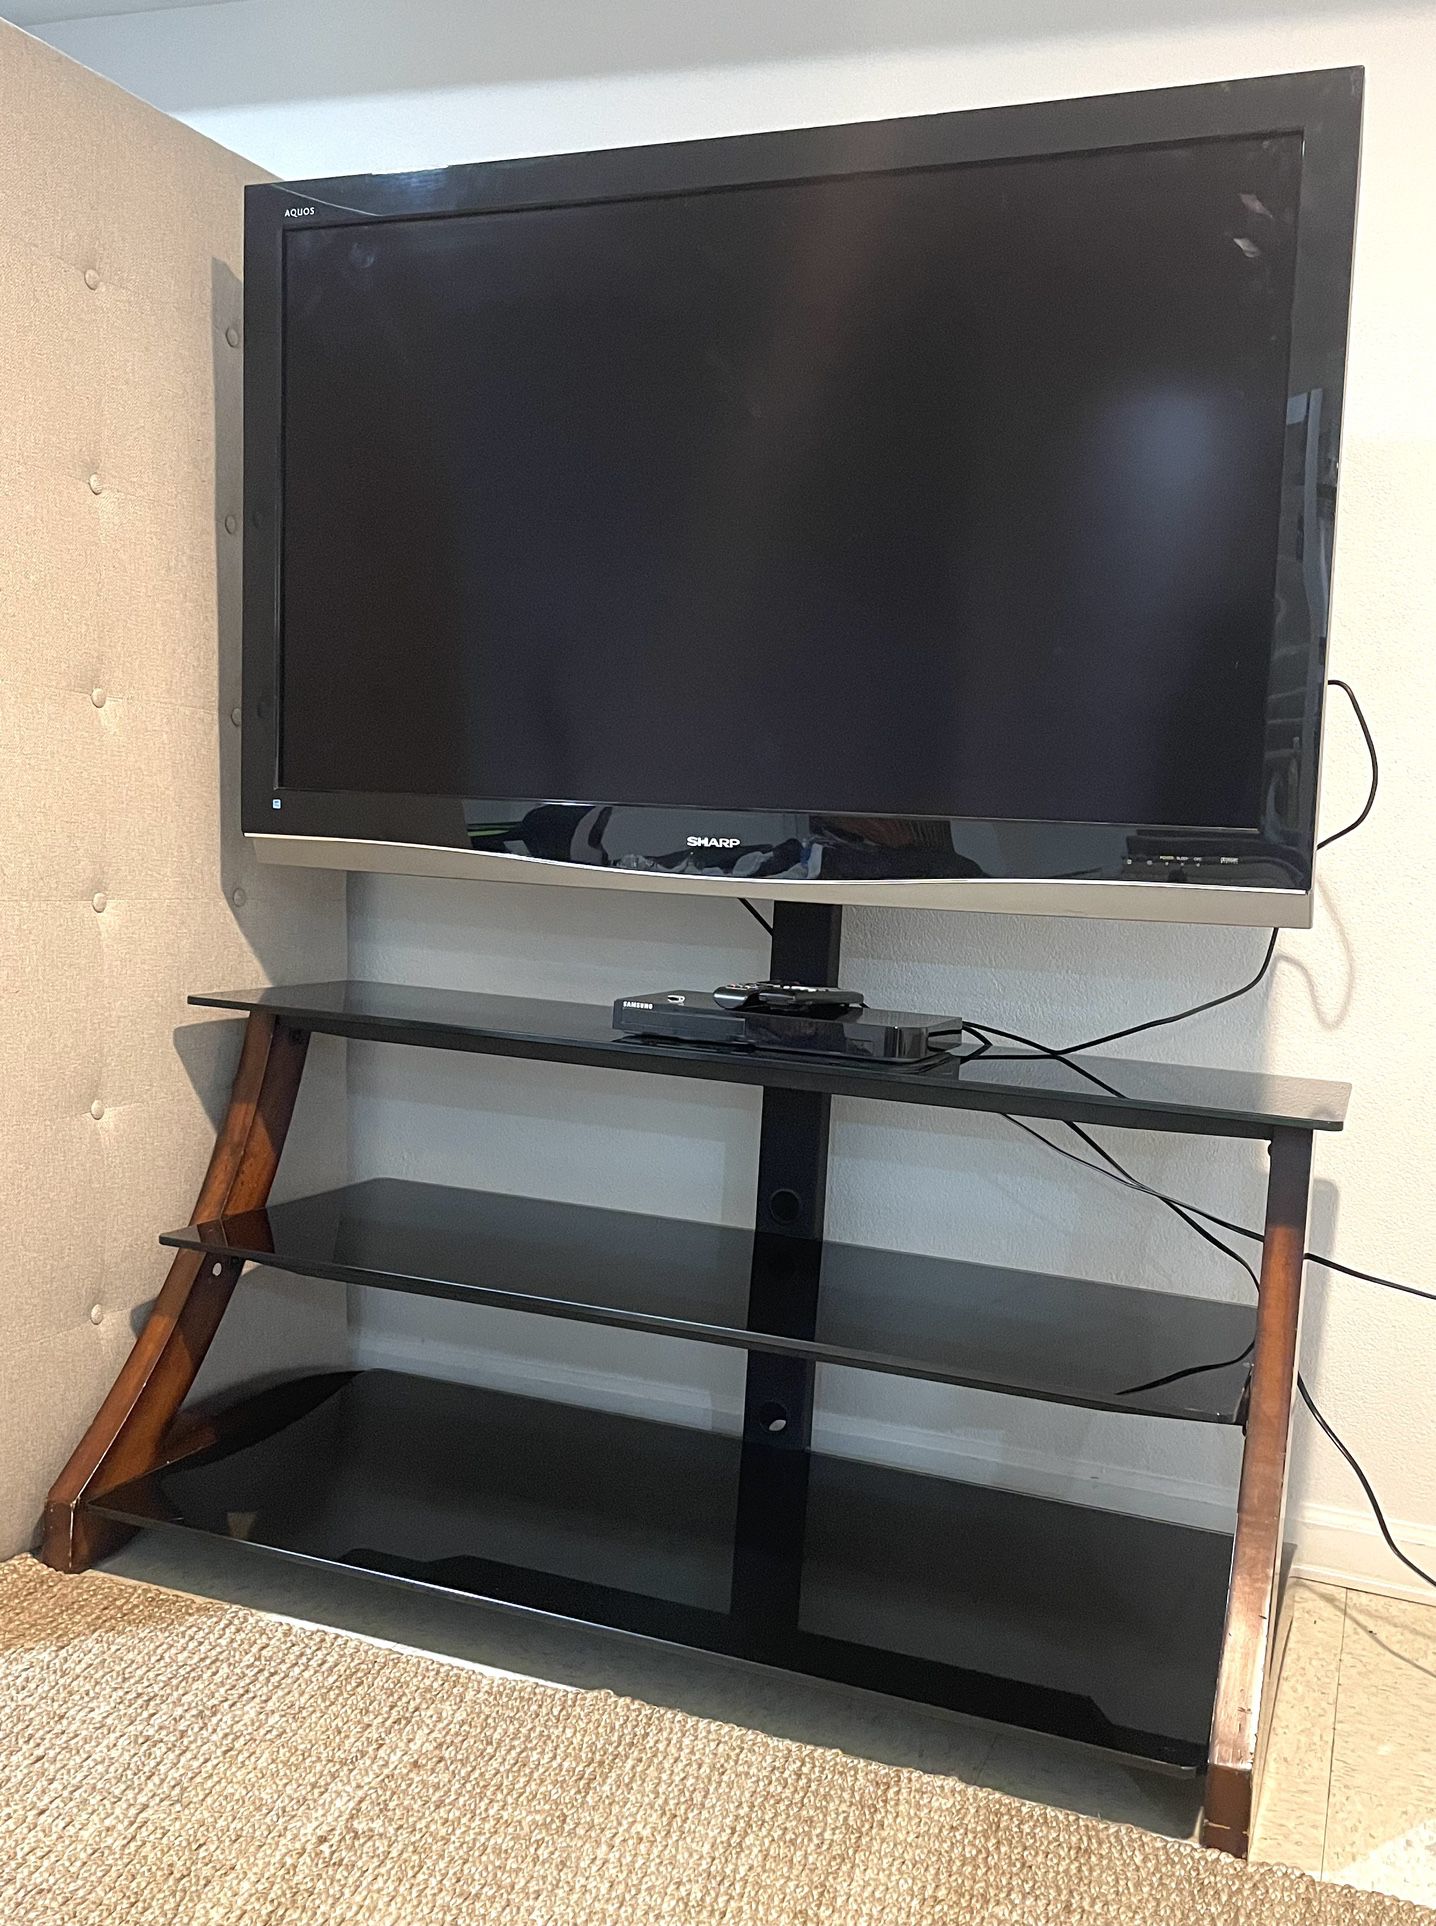 Tv & Stand 